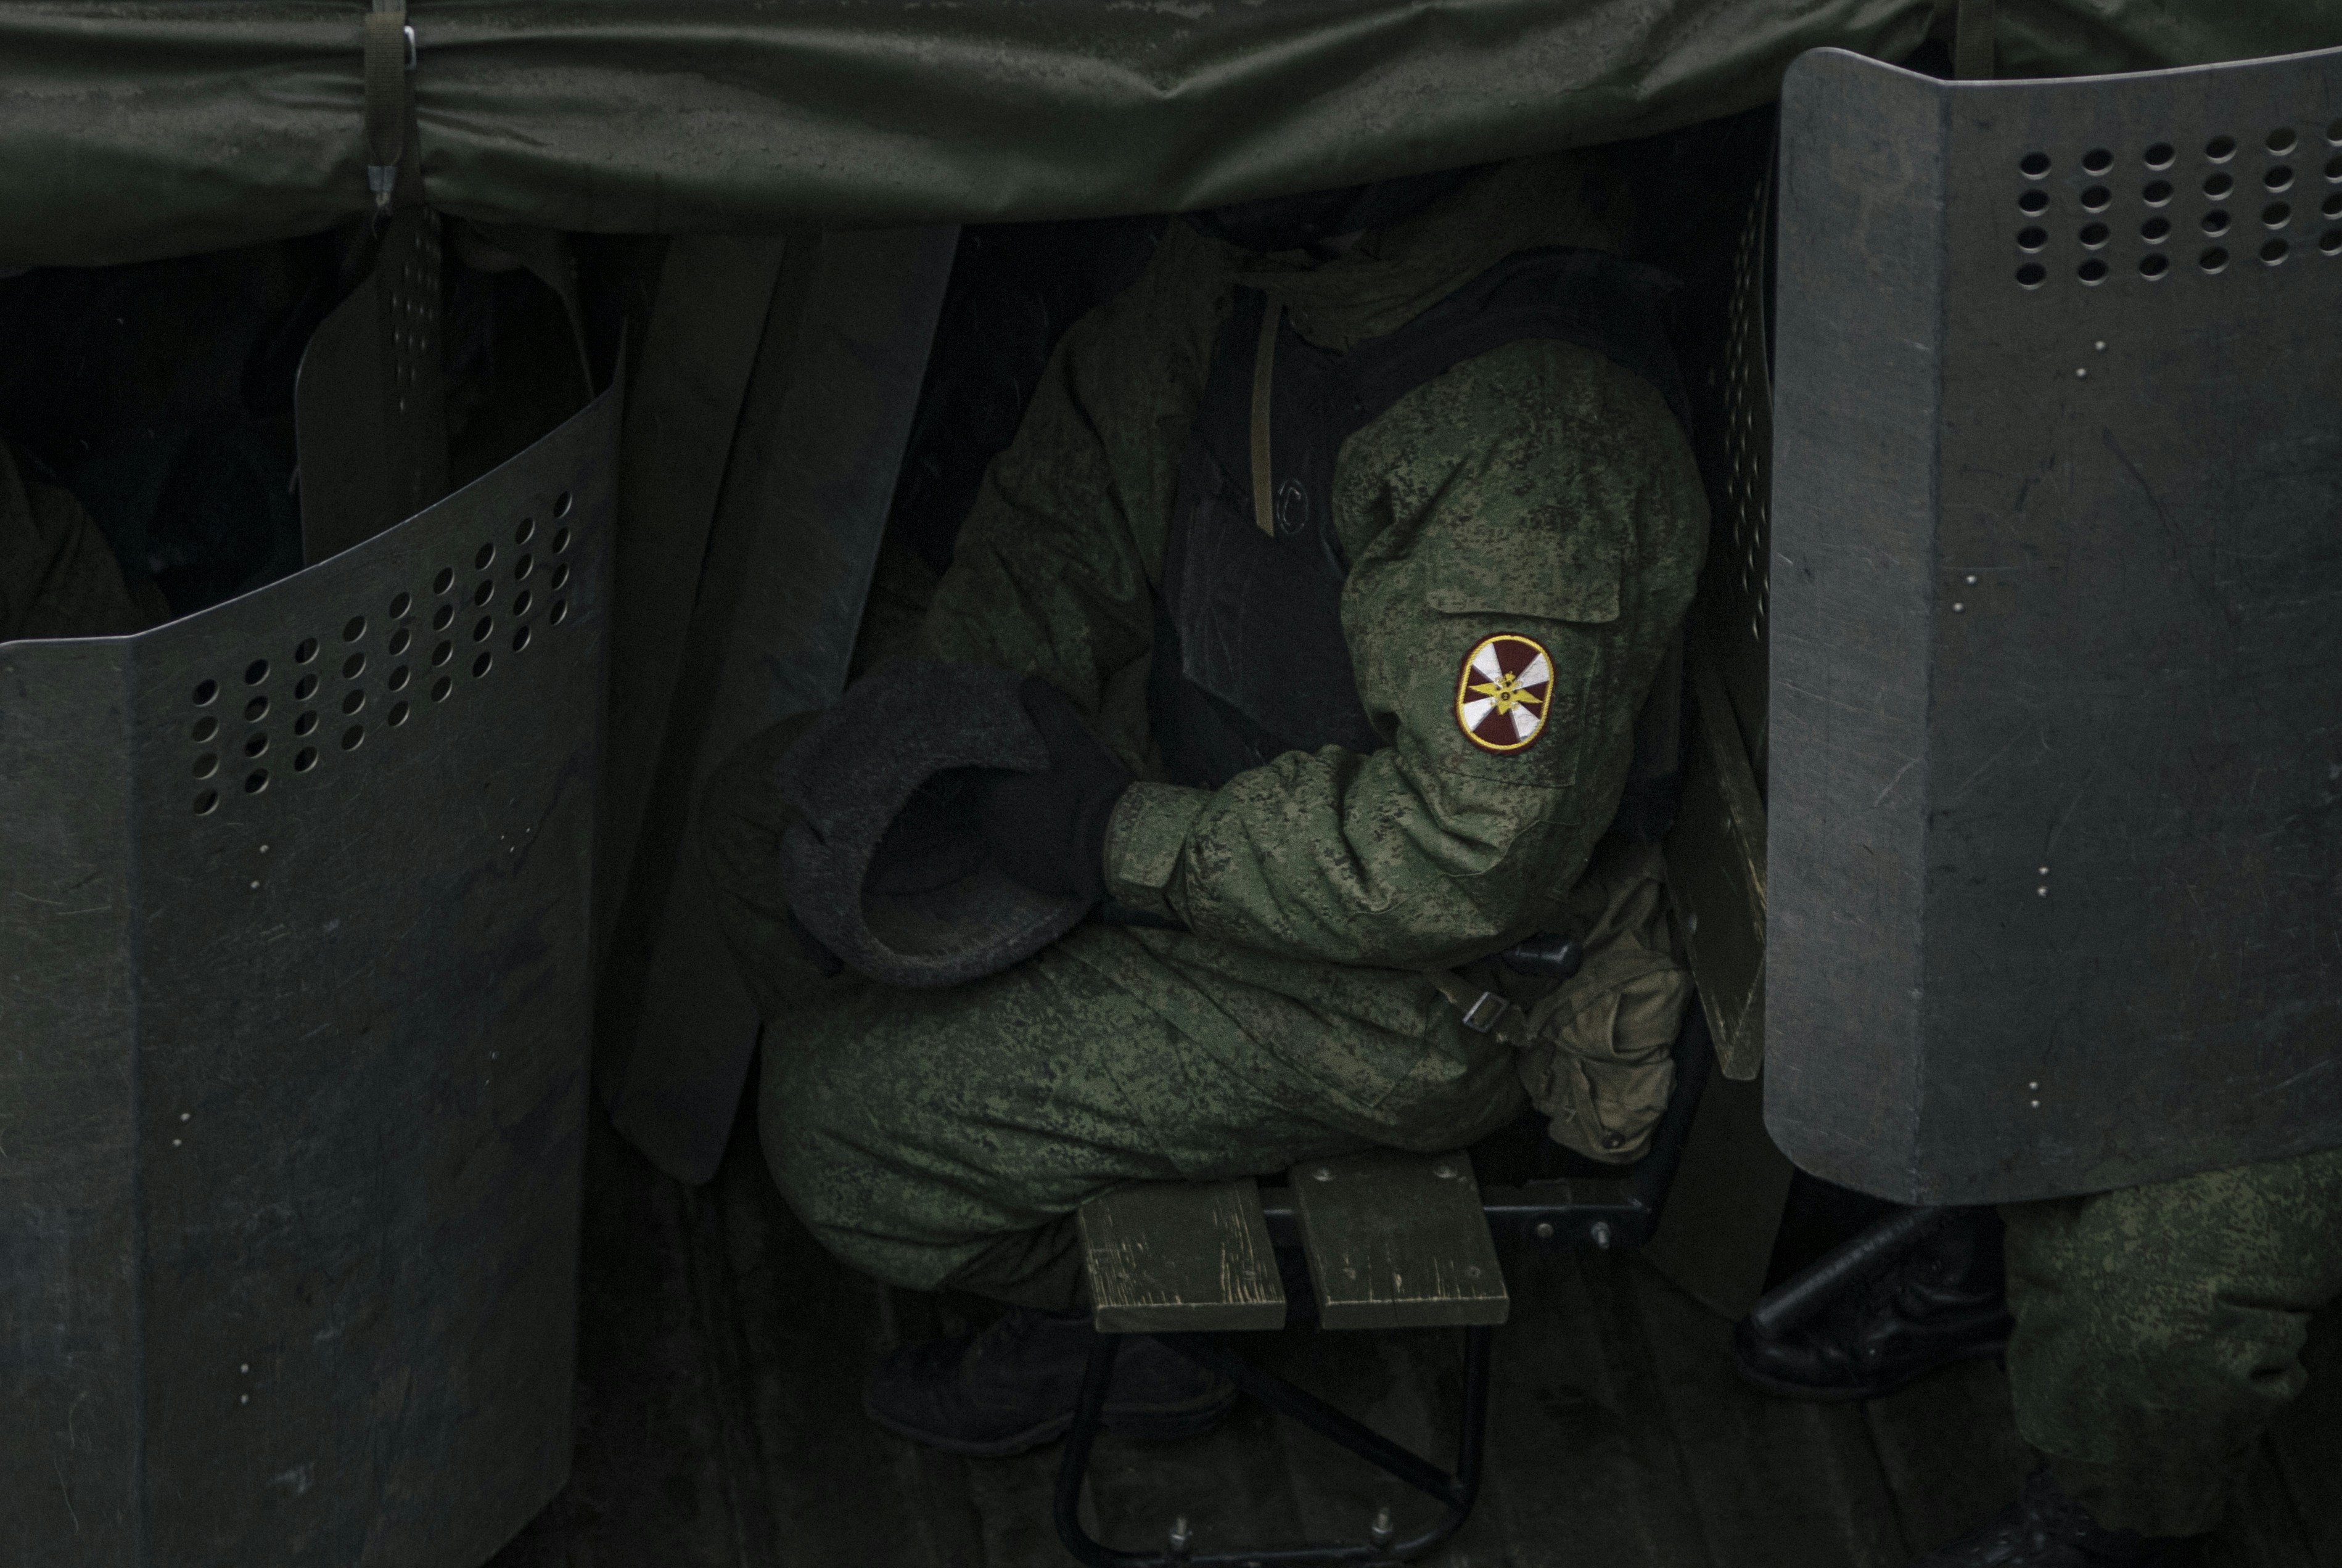 A military man in equipment in the back of a military truck.